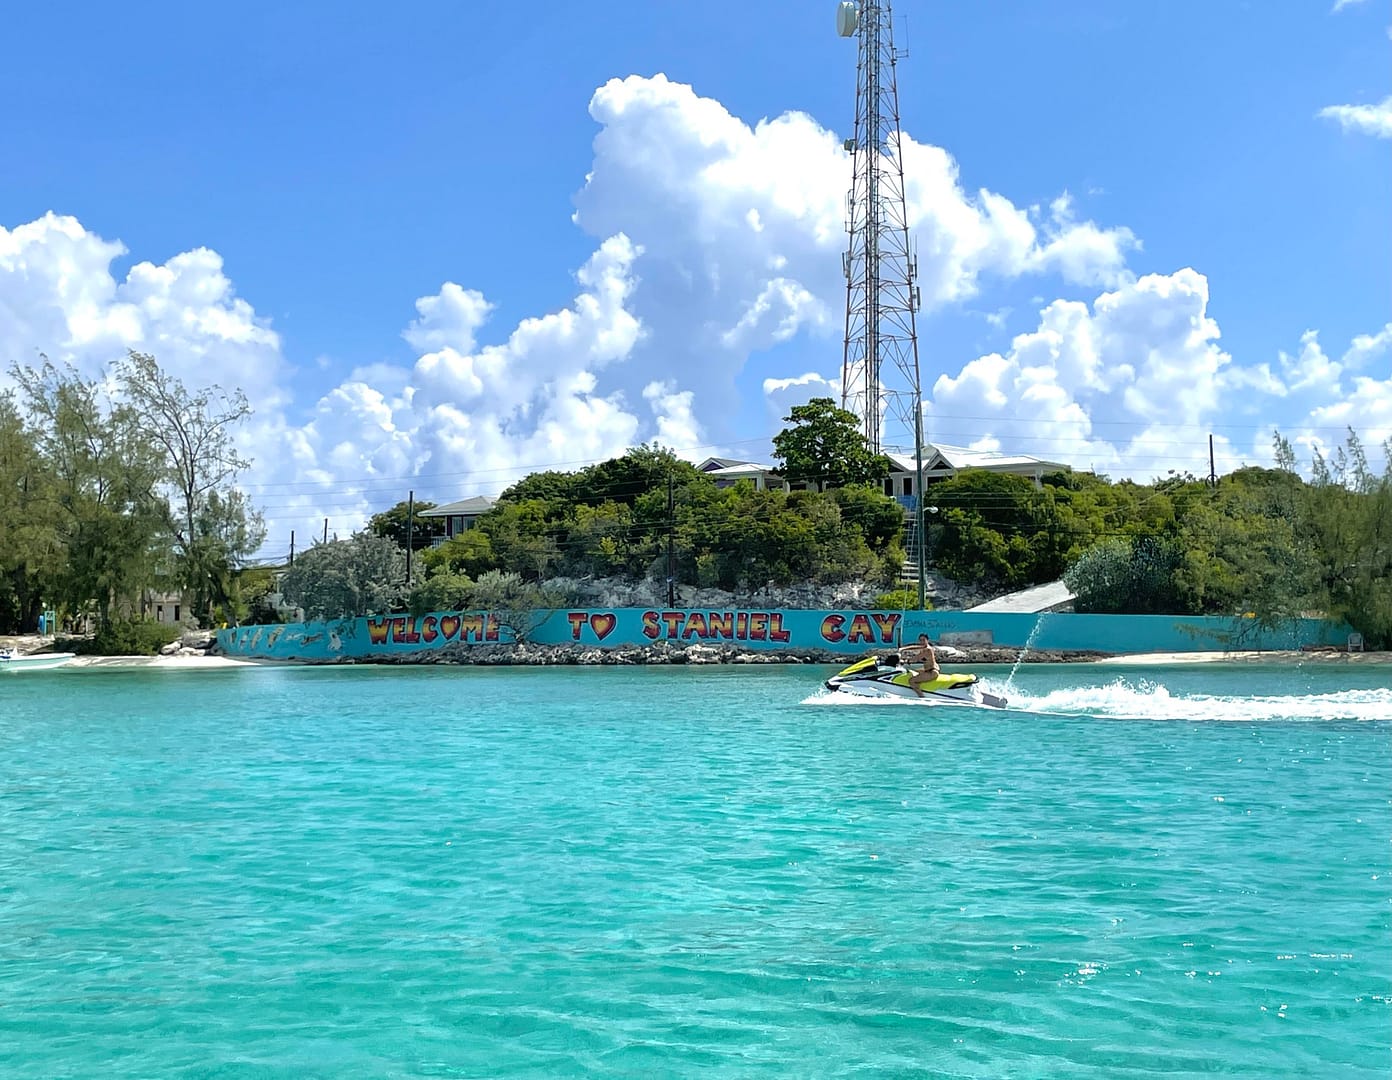 Things to do in Staniel Cay - Rent Jetskis